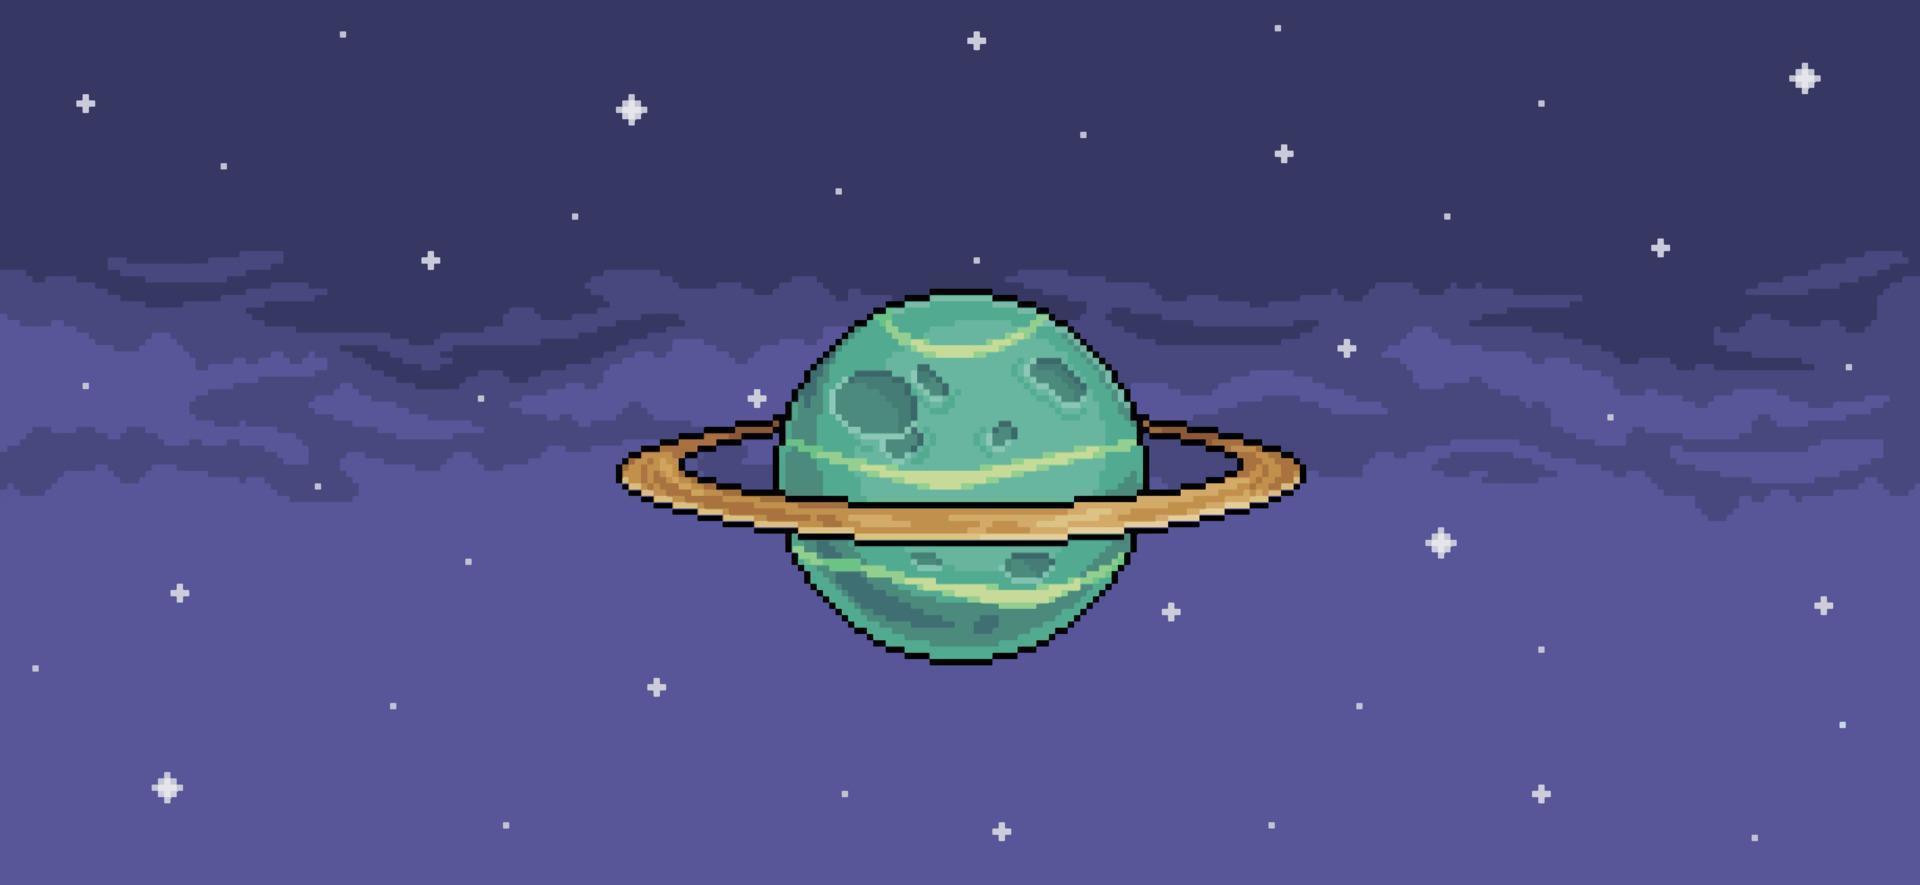 Pixel art has gone to another level with this stunning wallpaper of a planet with a circular orbit in the universe. It\'s a unique digital creation that combines the beauty of space and pixels. This wallpaper will stun and amaze you with its graphical details and vibrant colors. Enjoy this pixelated masterpiece on your screen today.